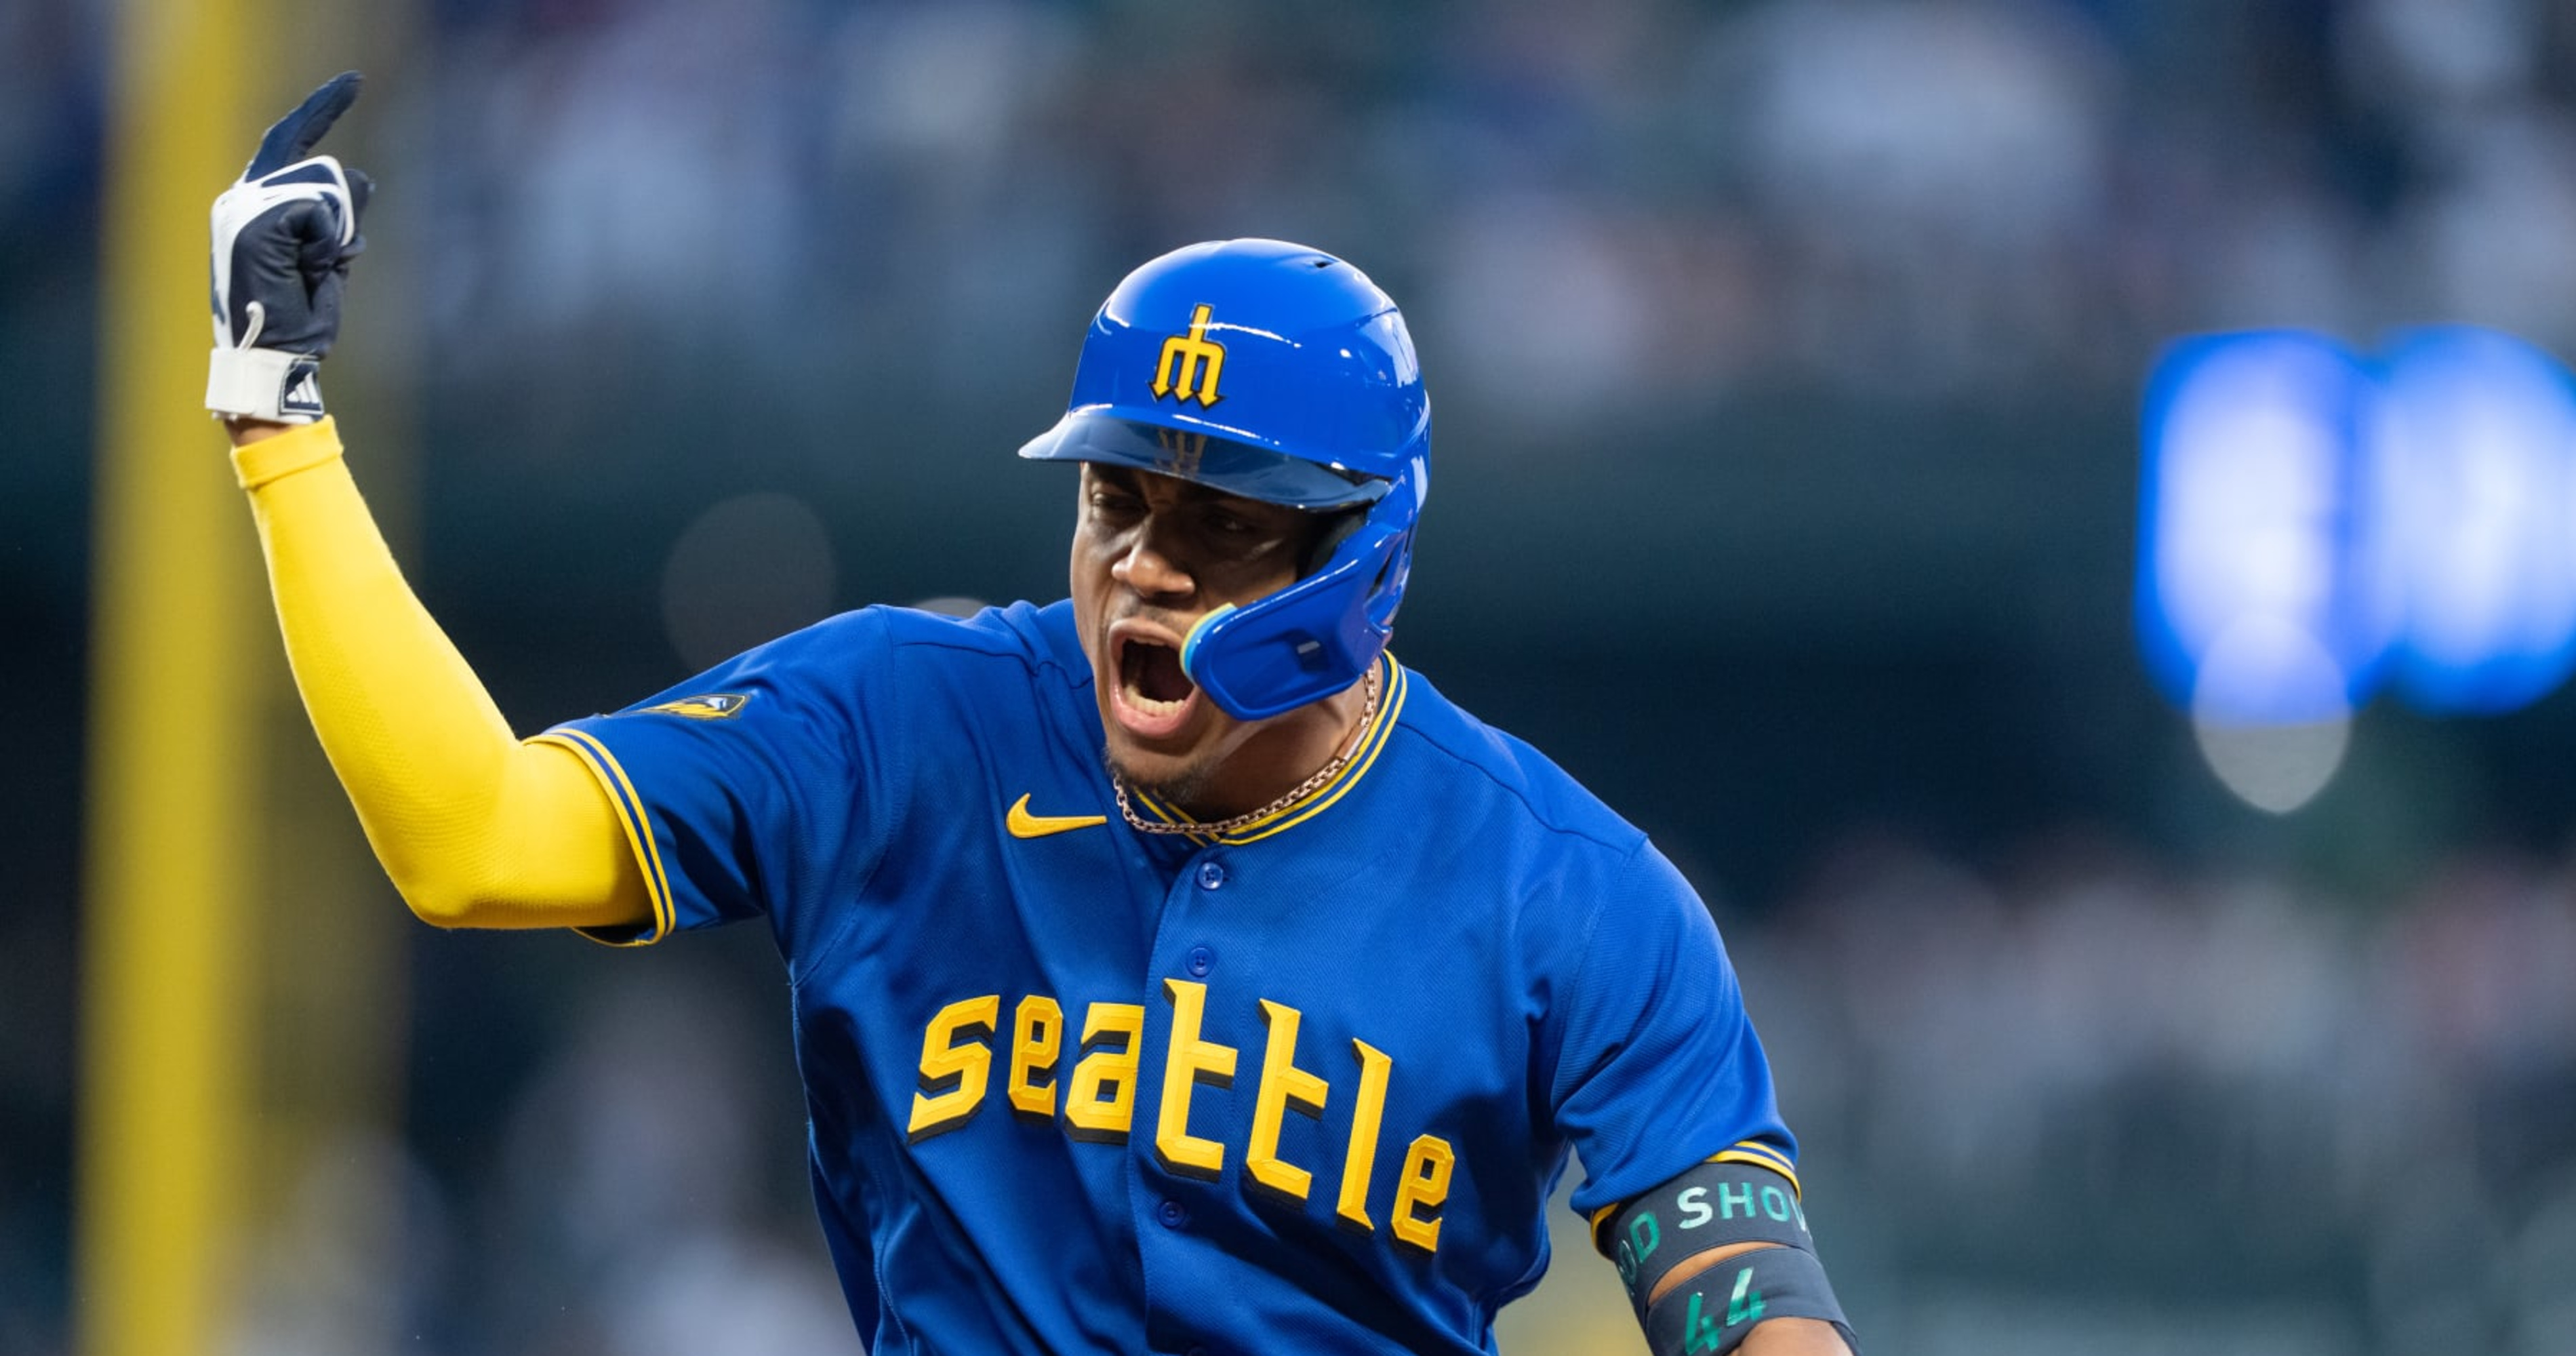 About: List of Seattle Mariners uniform promotion games